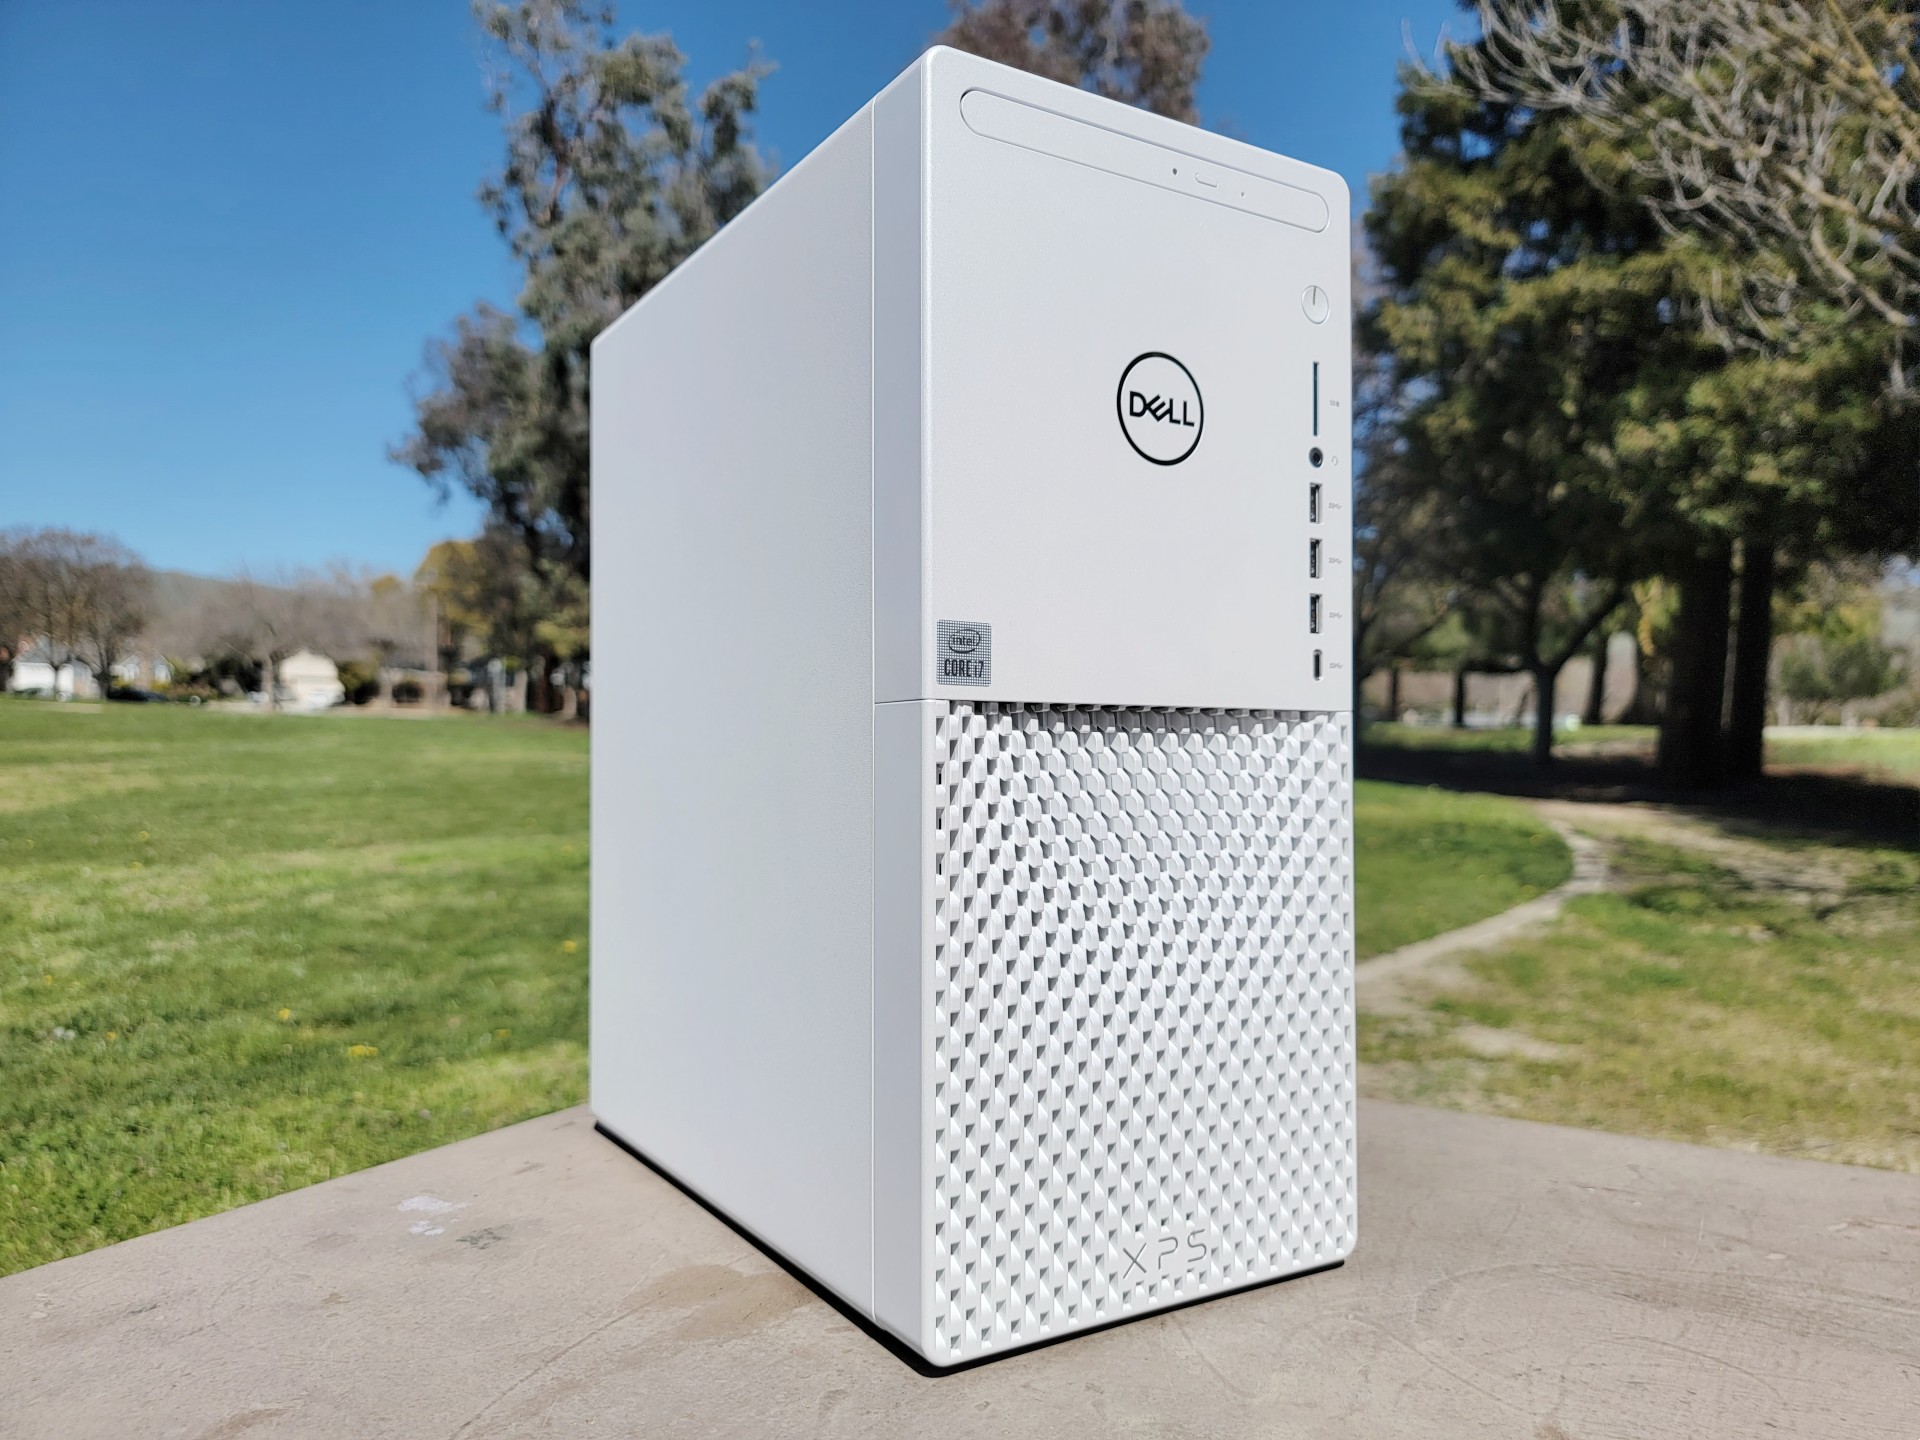 Dell XPS 8940 SE Desktop Review: The Do-It-All Home PC | Digital Trends